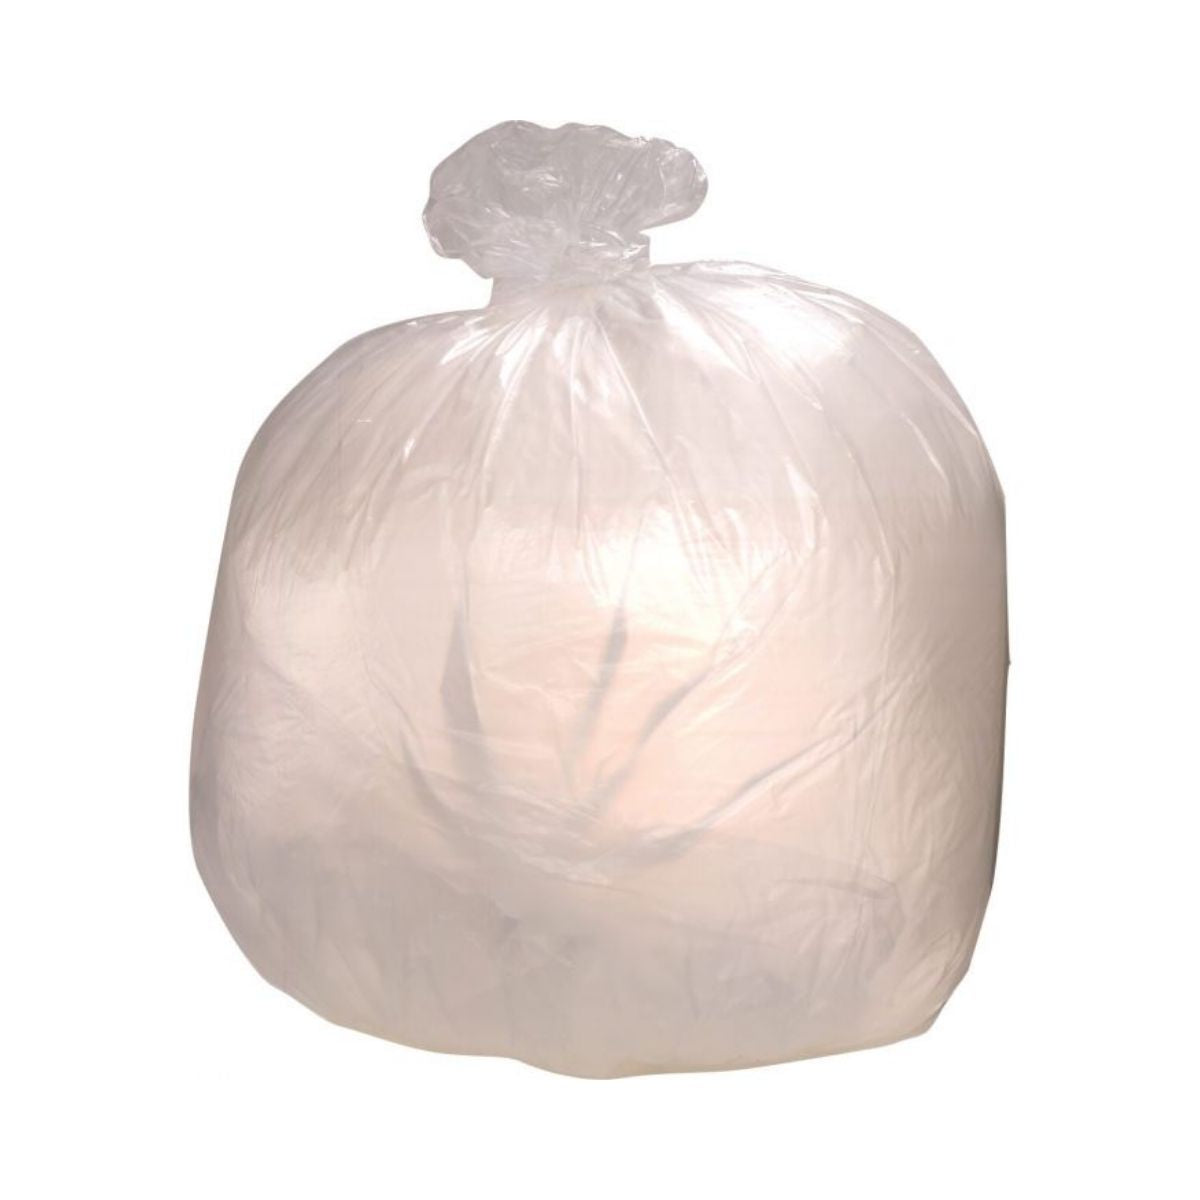 Commercial trash bags 15 gallon 24x33 5 mic case of 1000